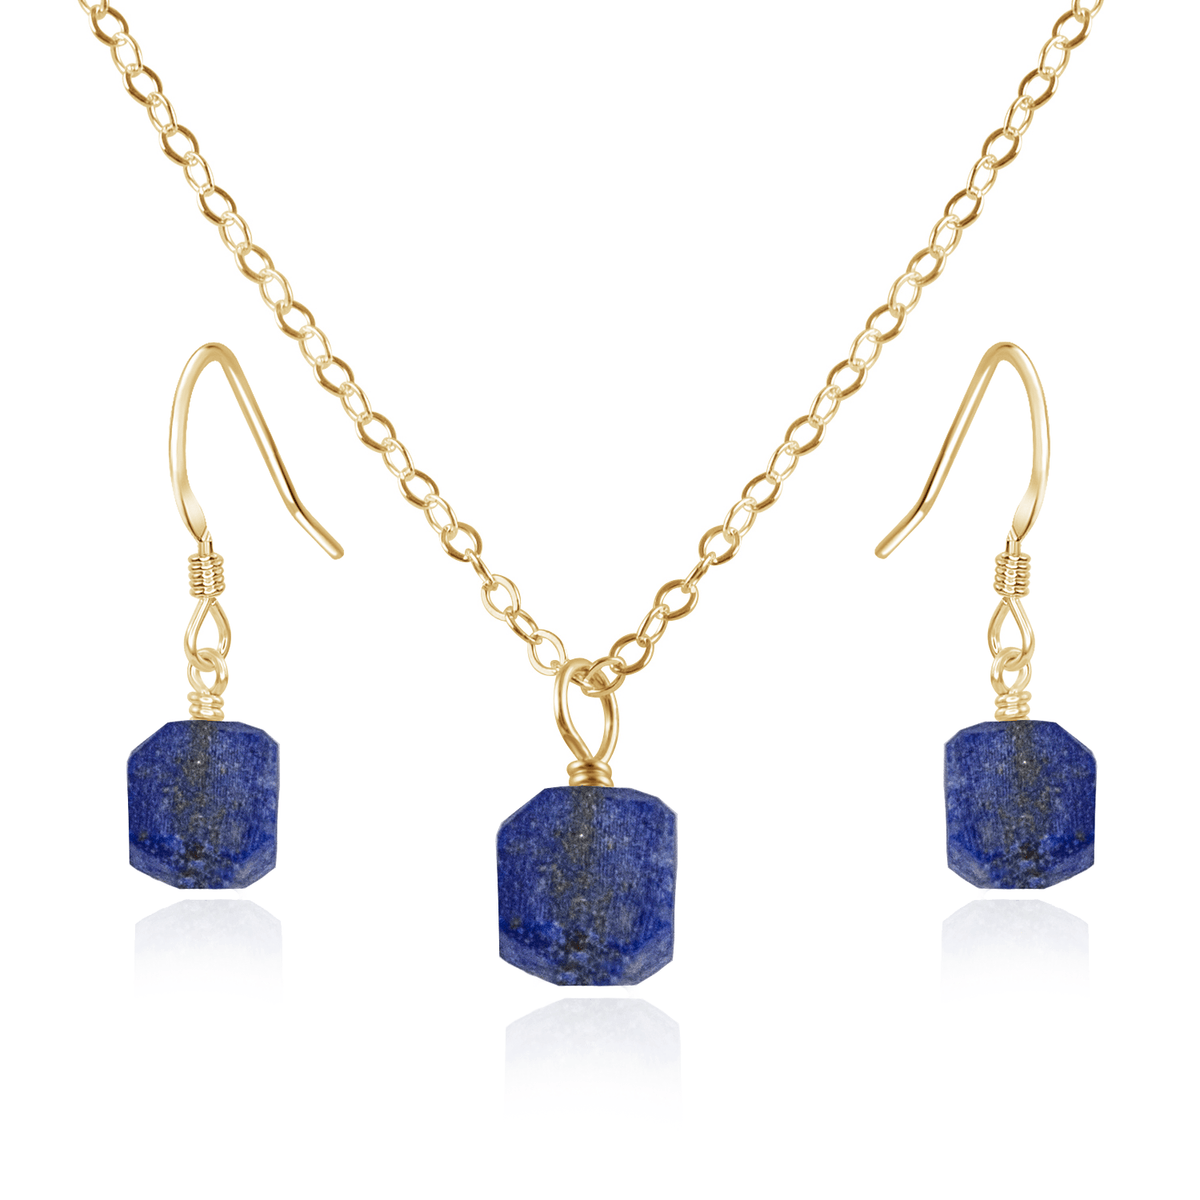 Raw Lapis Lazuli Crystal Earrings & Necklace Set - Raw Lapis Lazuli Crystal Earrings & Necklace Set - 14k Gold Fill / Cable - Luna Tide Handmade Crystal Jewellery